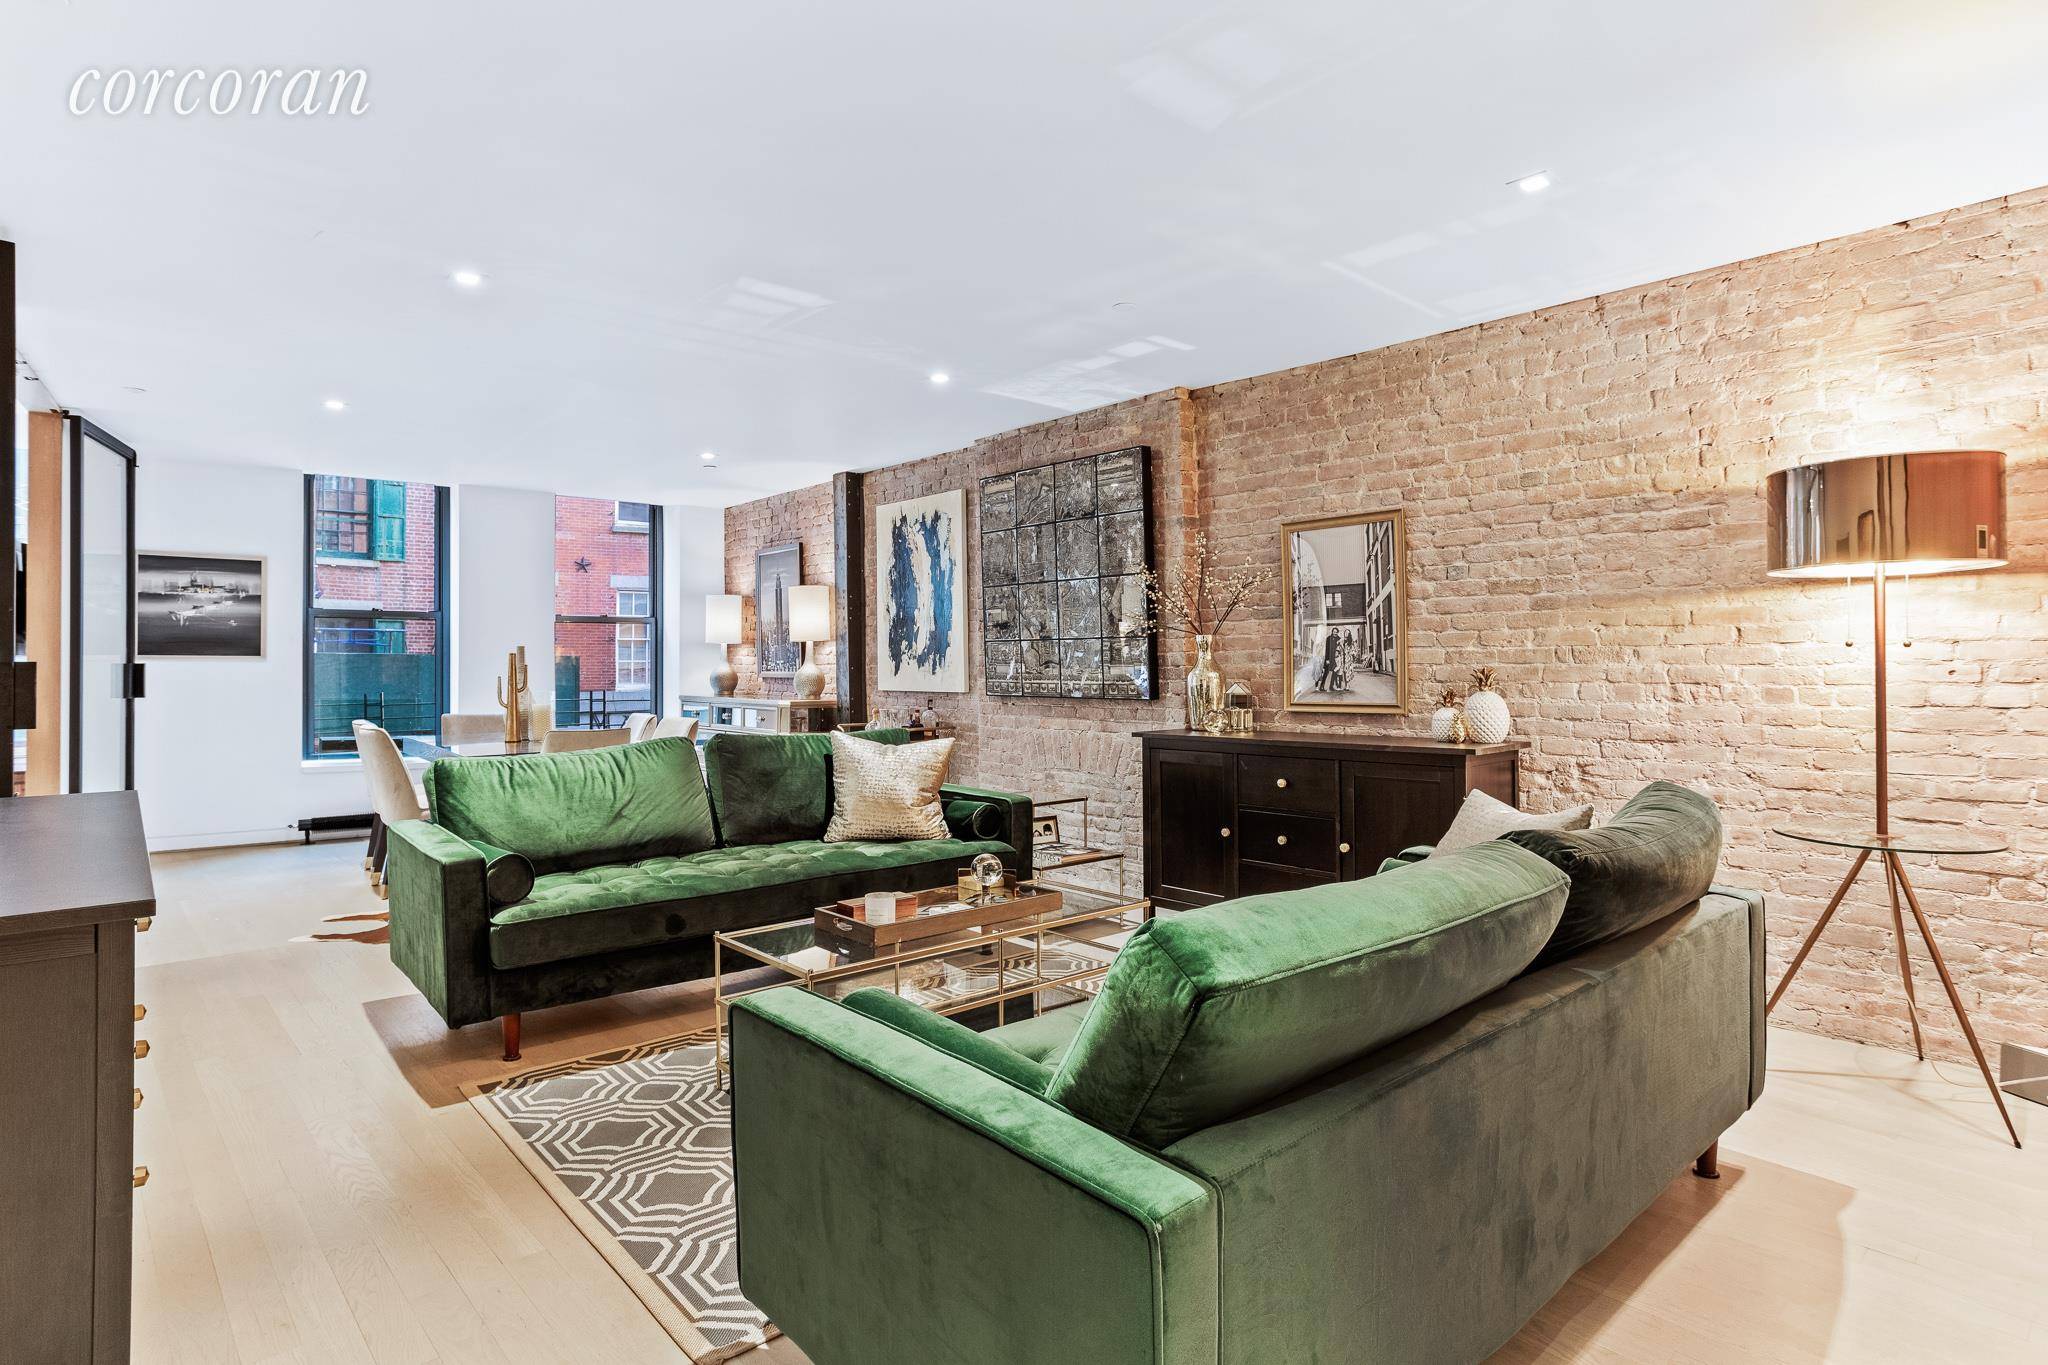 Luxury, loft like two bedroom two bathroom condominium apartment on a picturesque cobble stone street in trendy South Street Seaport !